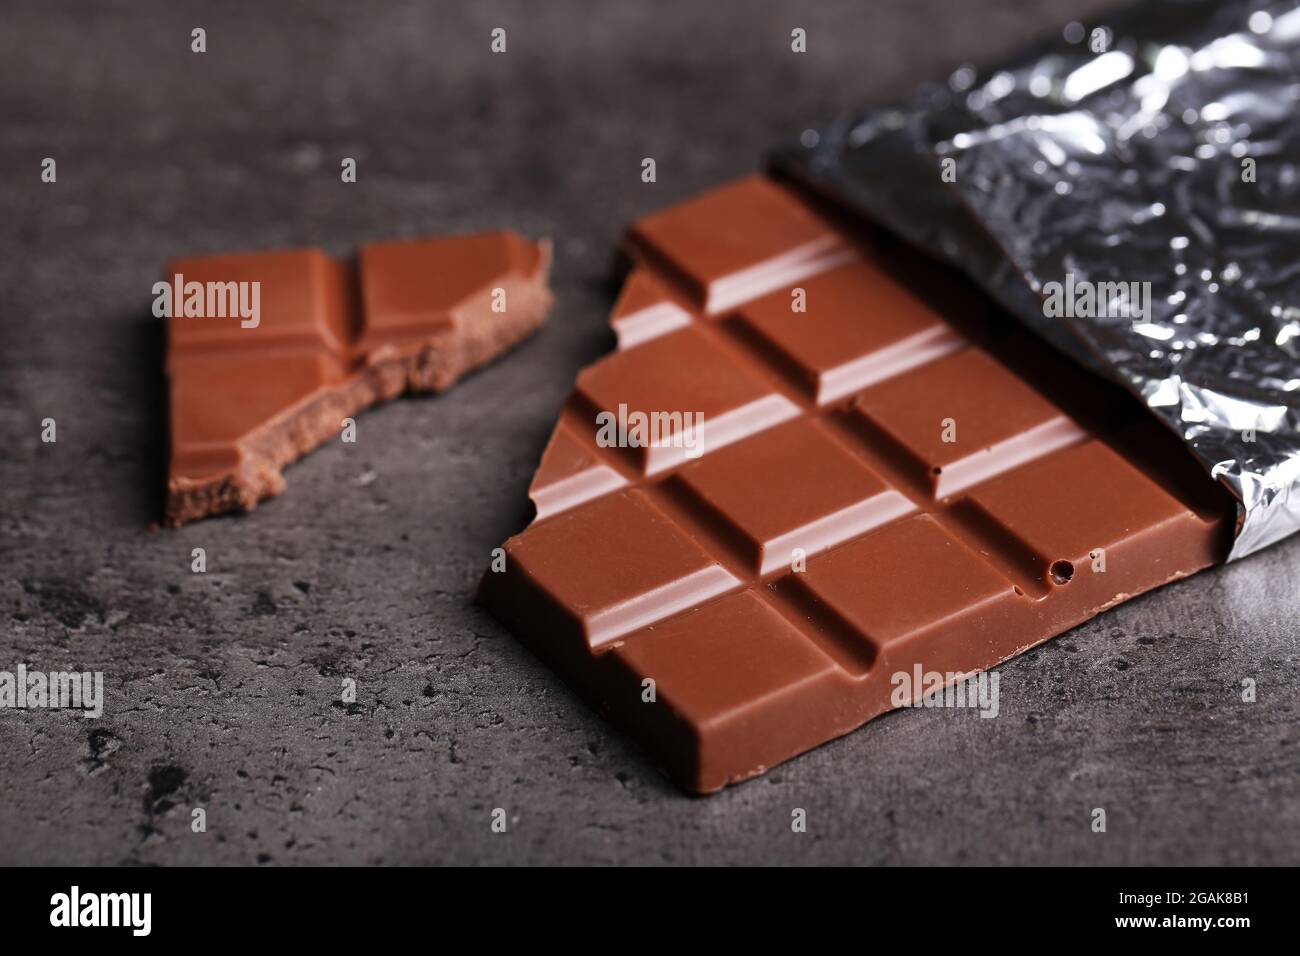 Chocolate bar in foil on gray background Stock Photo - Alamy